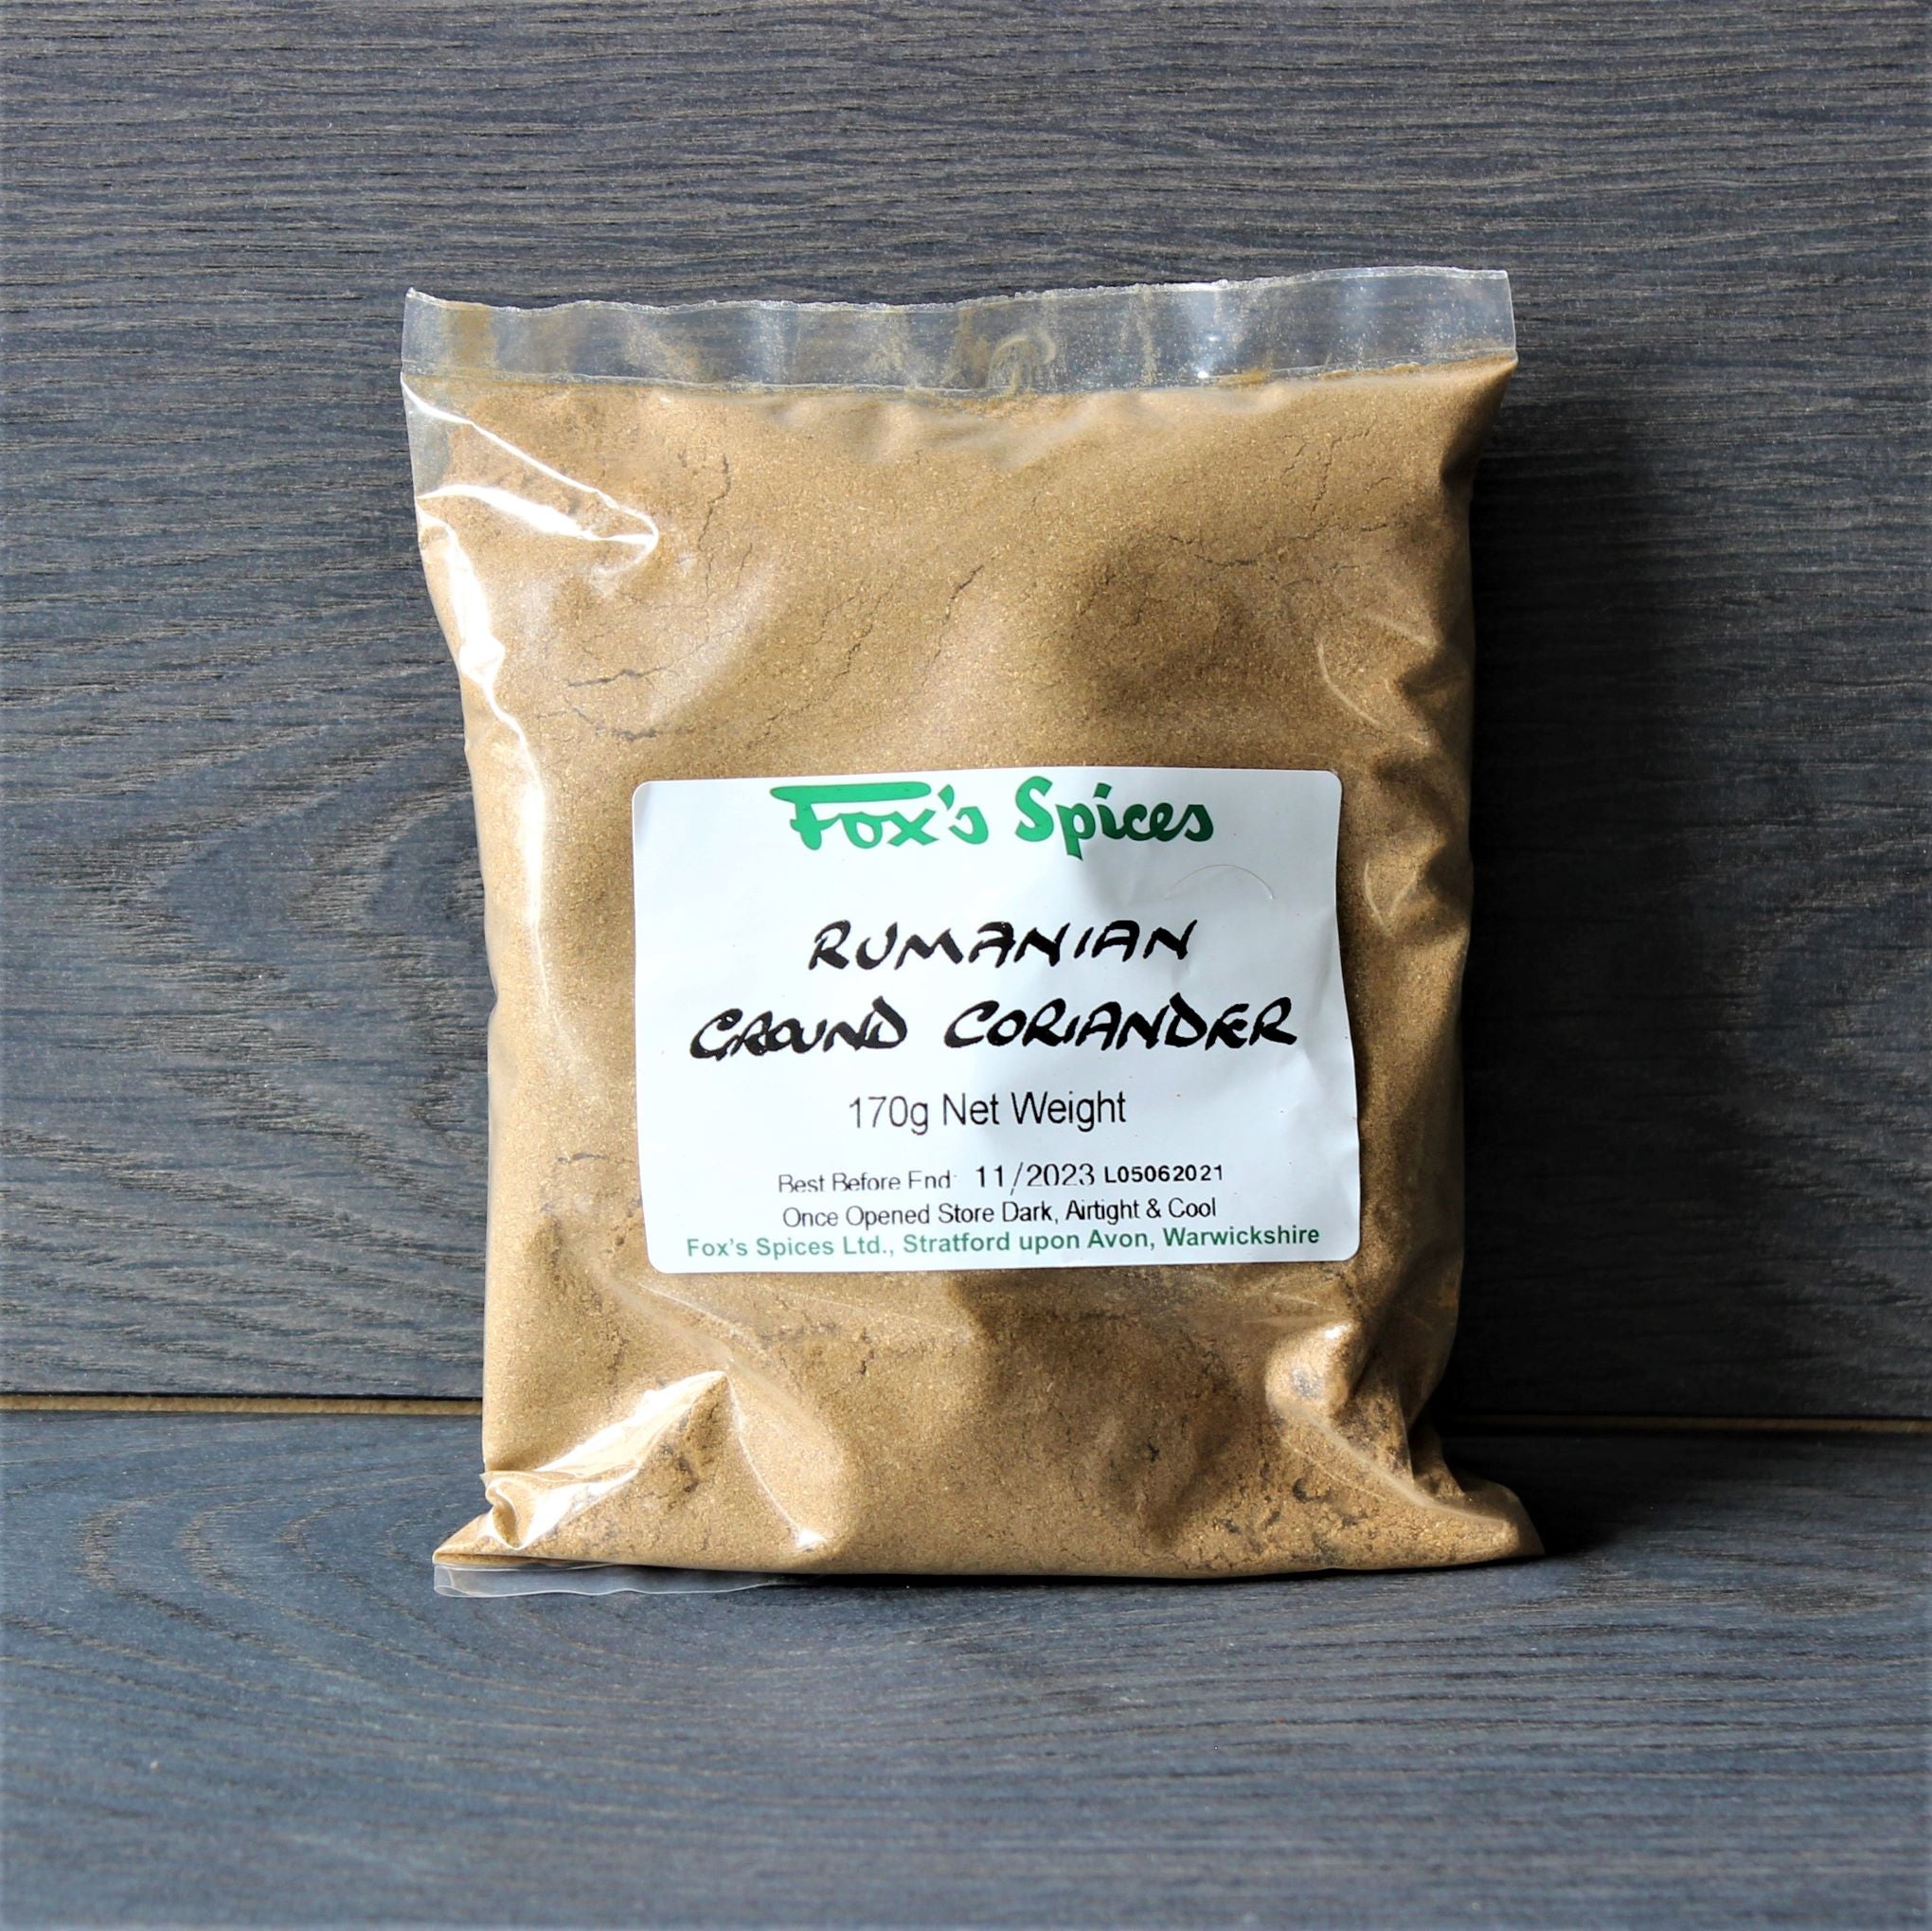 A 170g bag of ground coriander from Fox's Spices